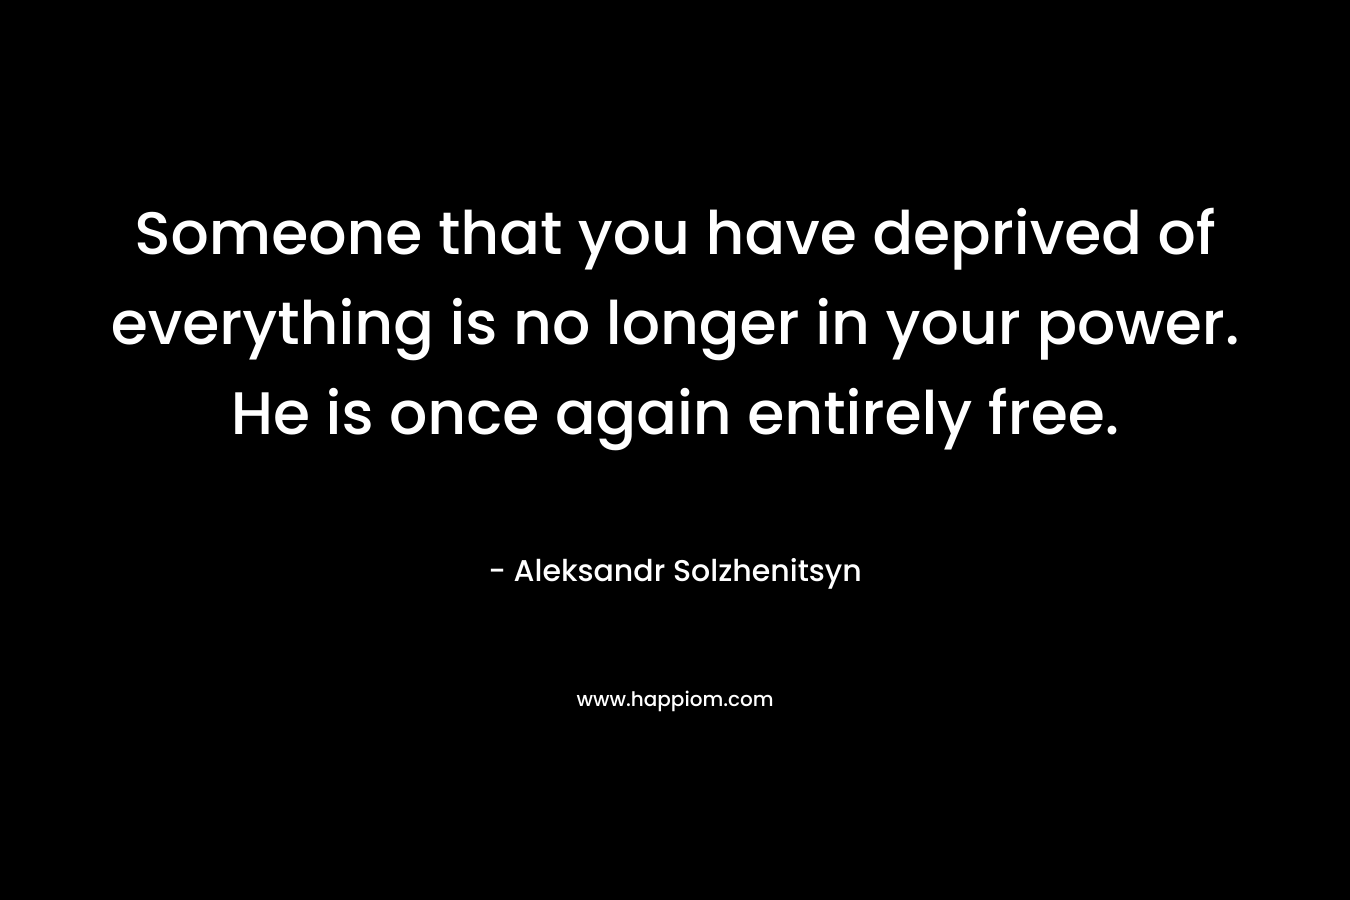 Someone that you have deprived of everything is no longer in your power. He is once again entirely free. – Aleksandr Solzhenitsyn